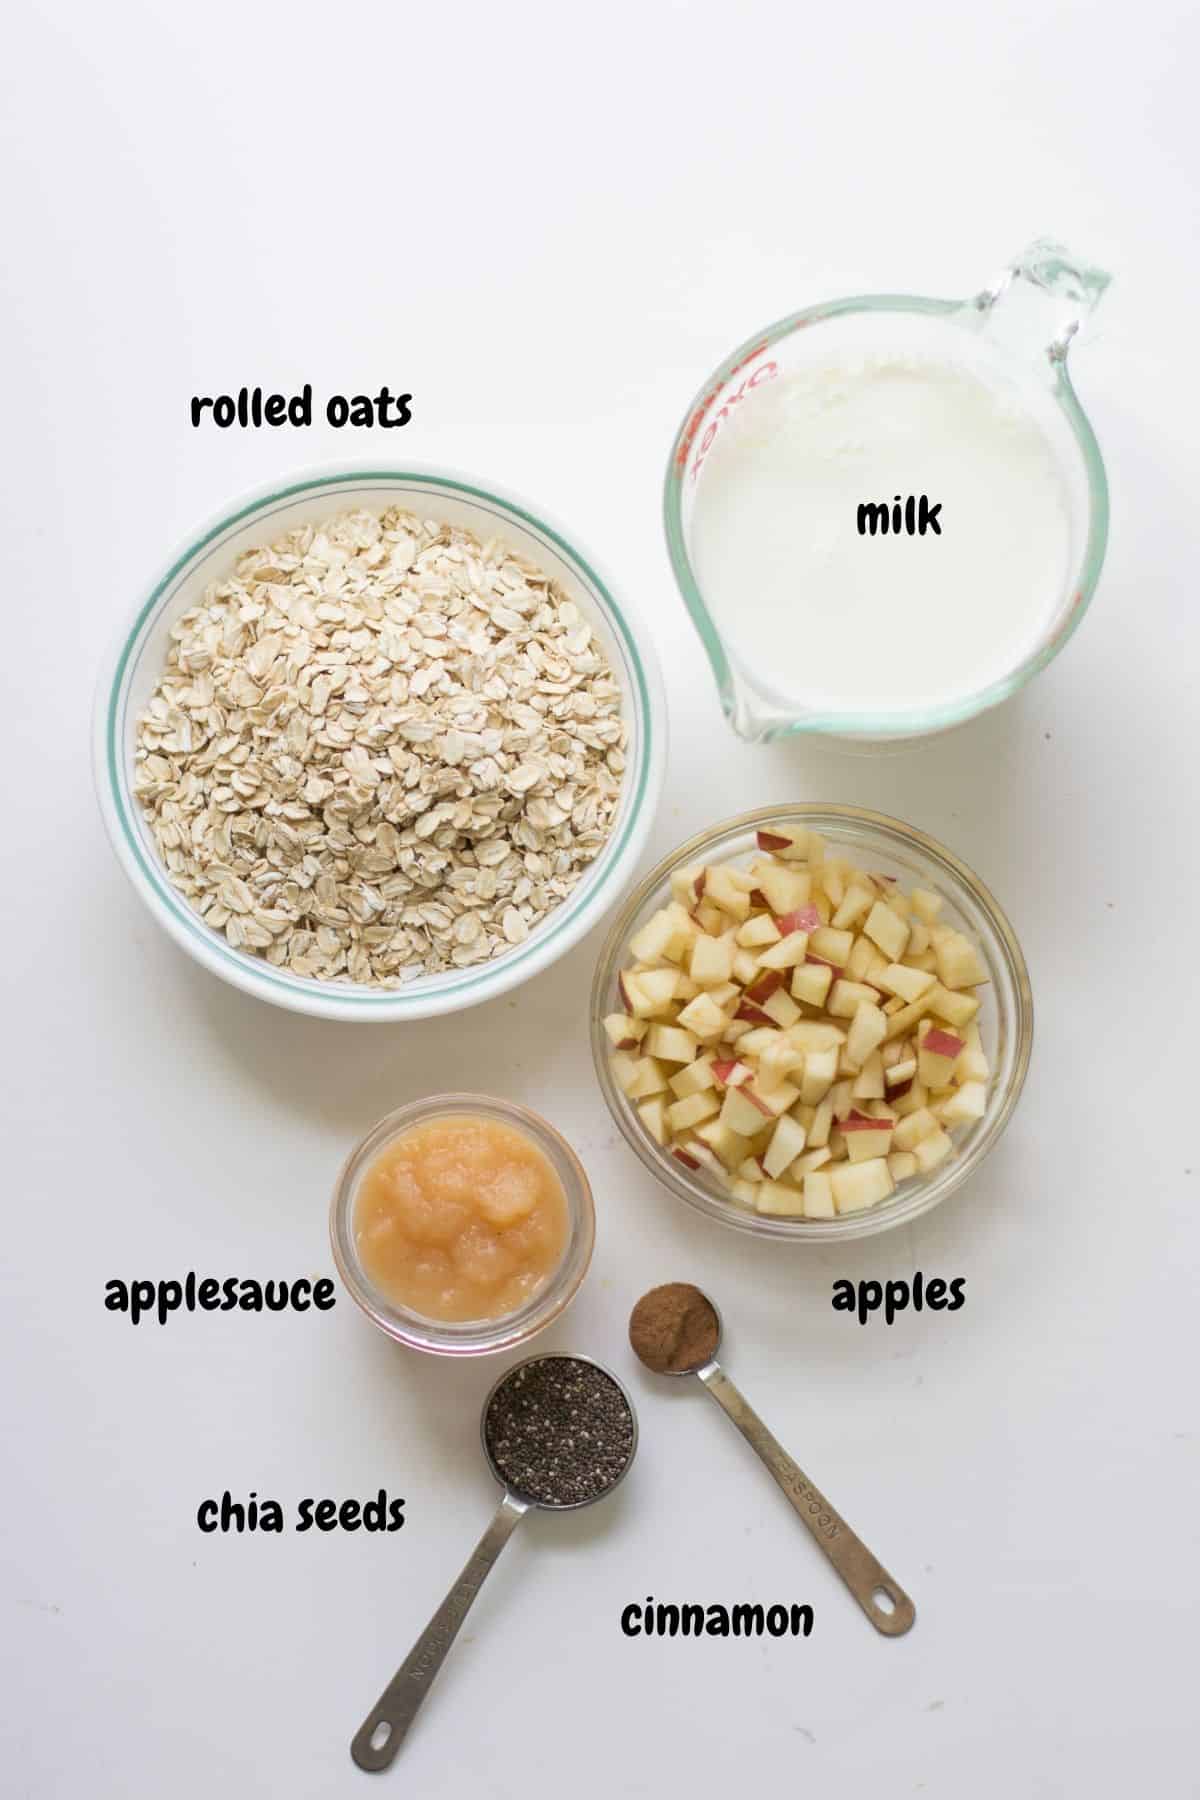 Ingredients laid out on a white background.